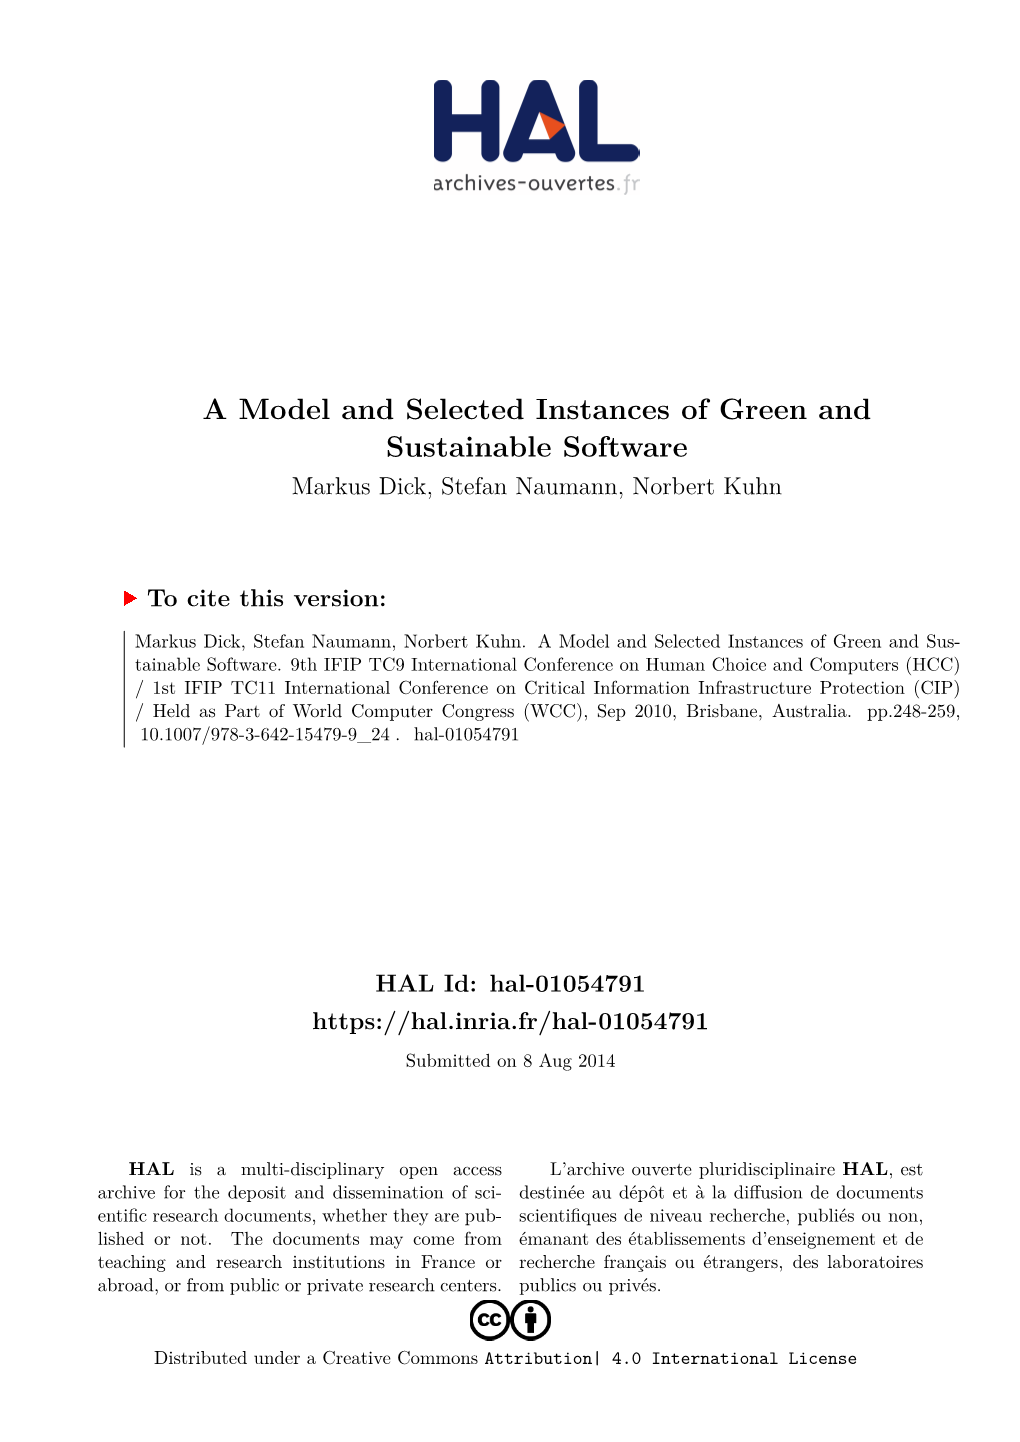 A Model and Selected Instances of Green and Sustainable Software Markus Dick, Stefan Naumann, Norbert Kuhn